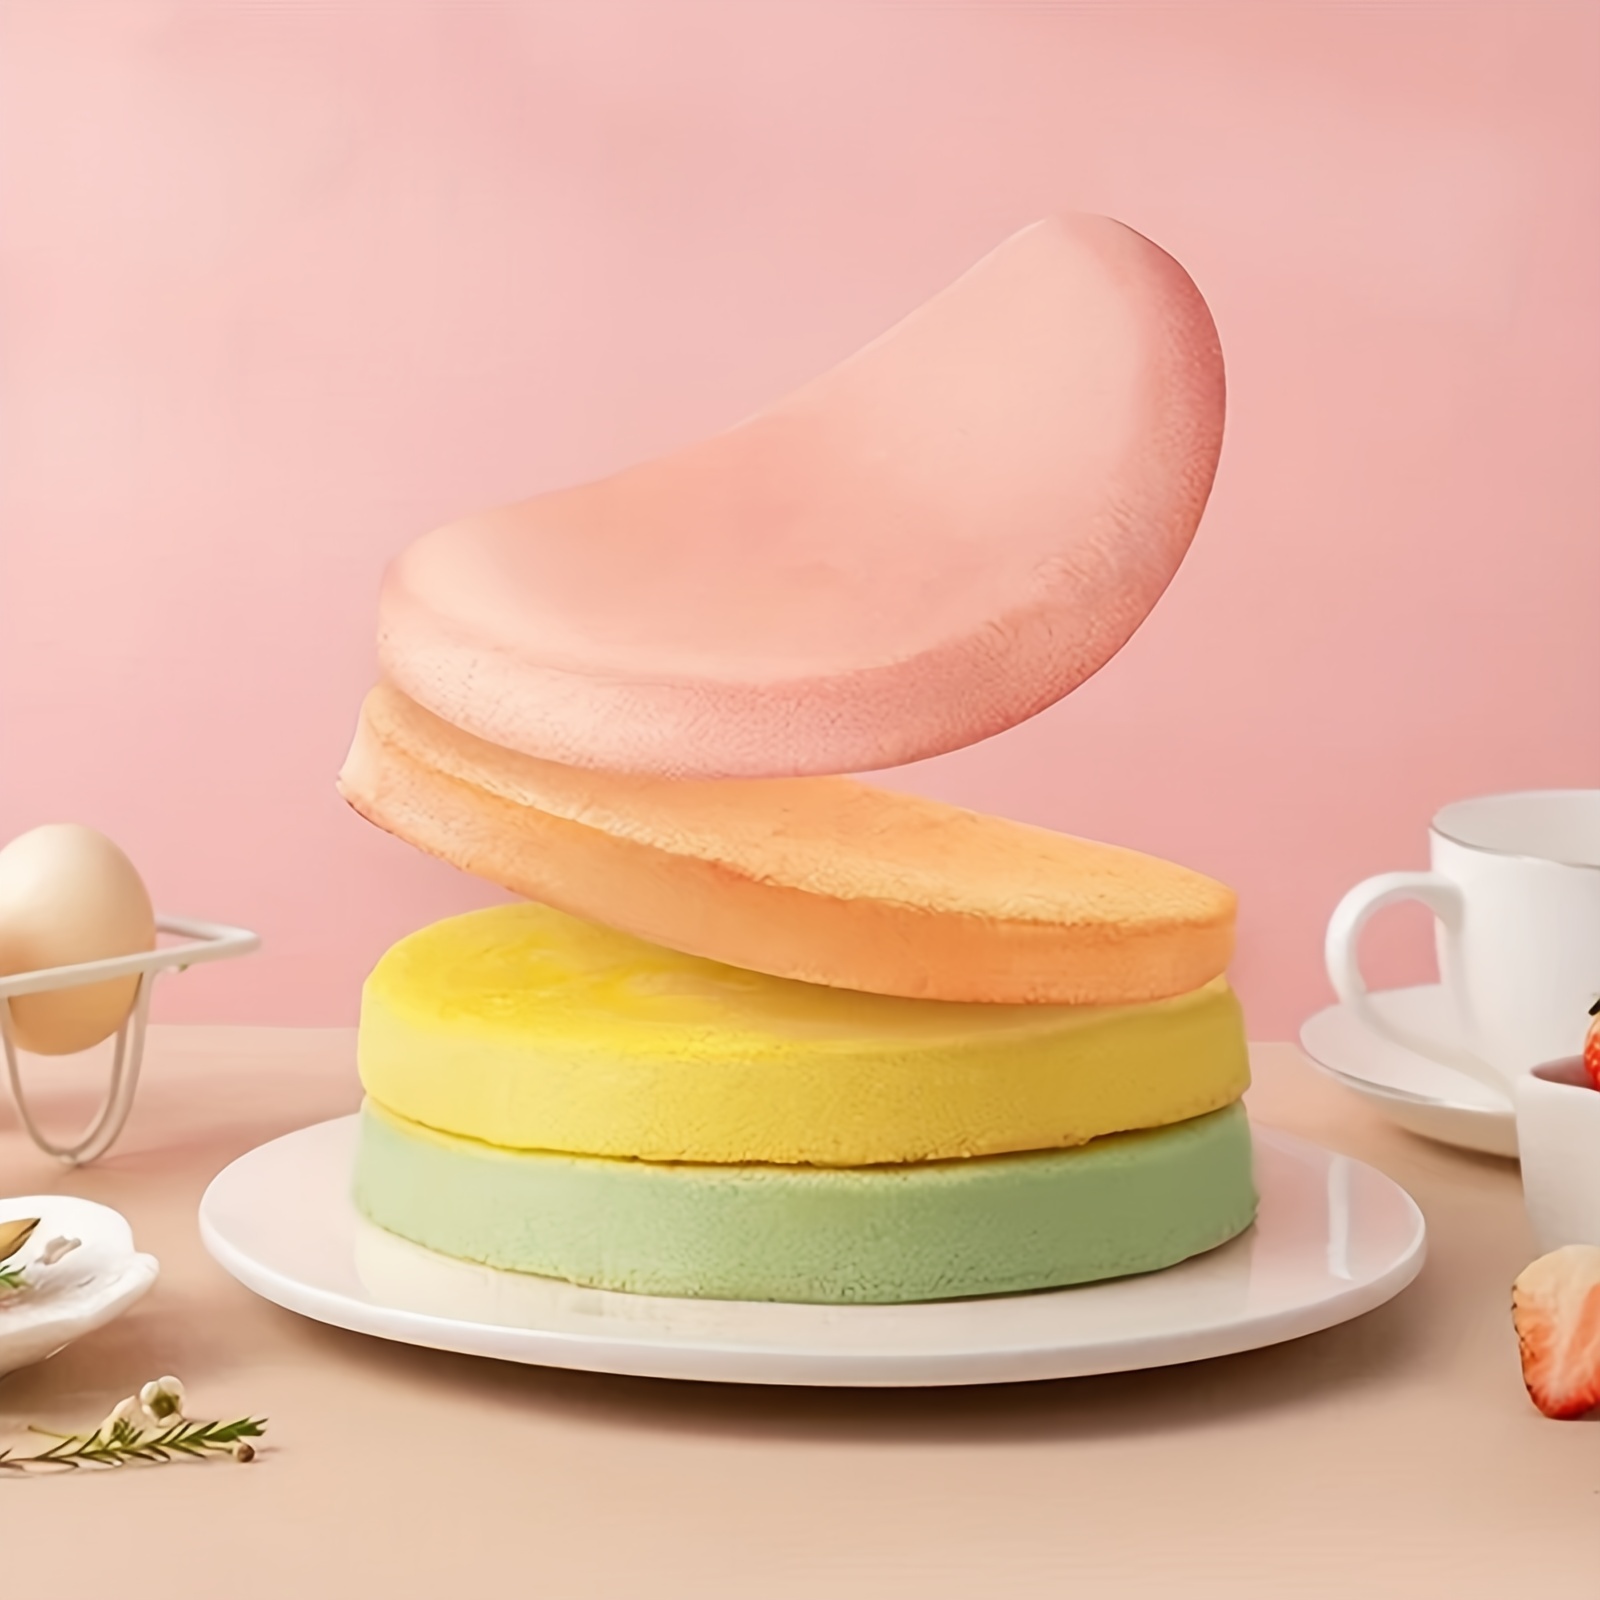 Silicone pans create more level cake layers